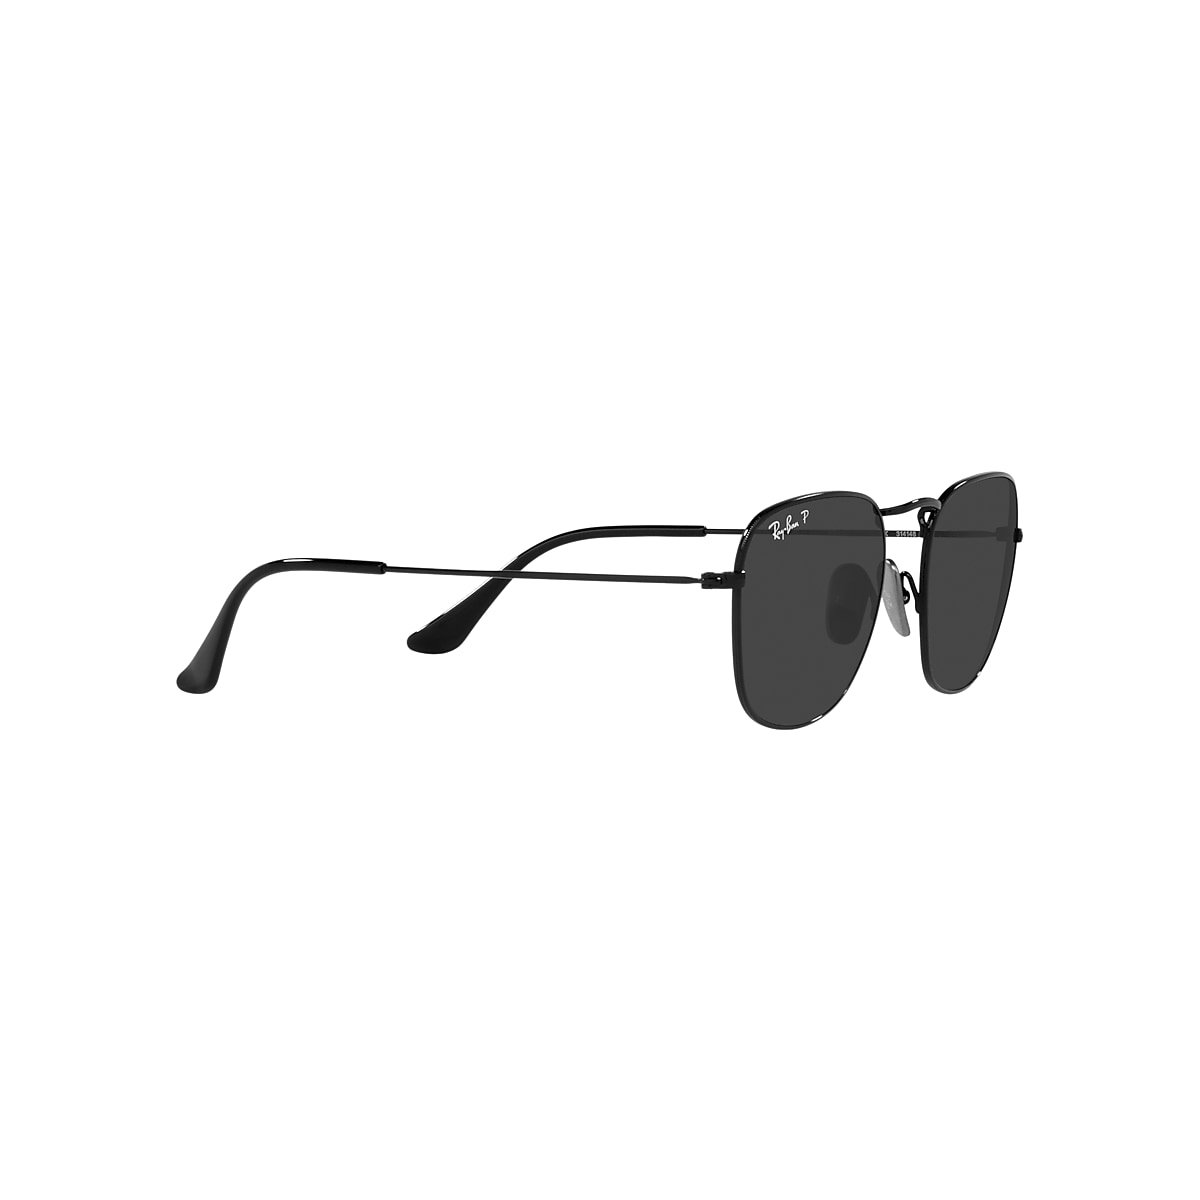 FRANK TITANIUM LIMITED EDITION Sunglasses in Black and Black - RB8157 |  Ray-Ban® US